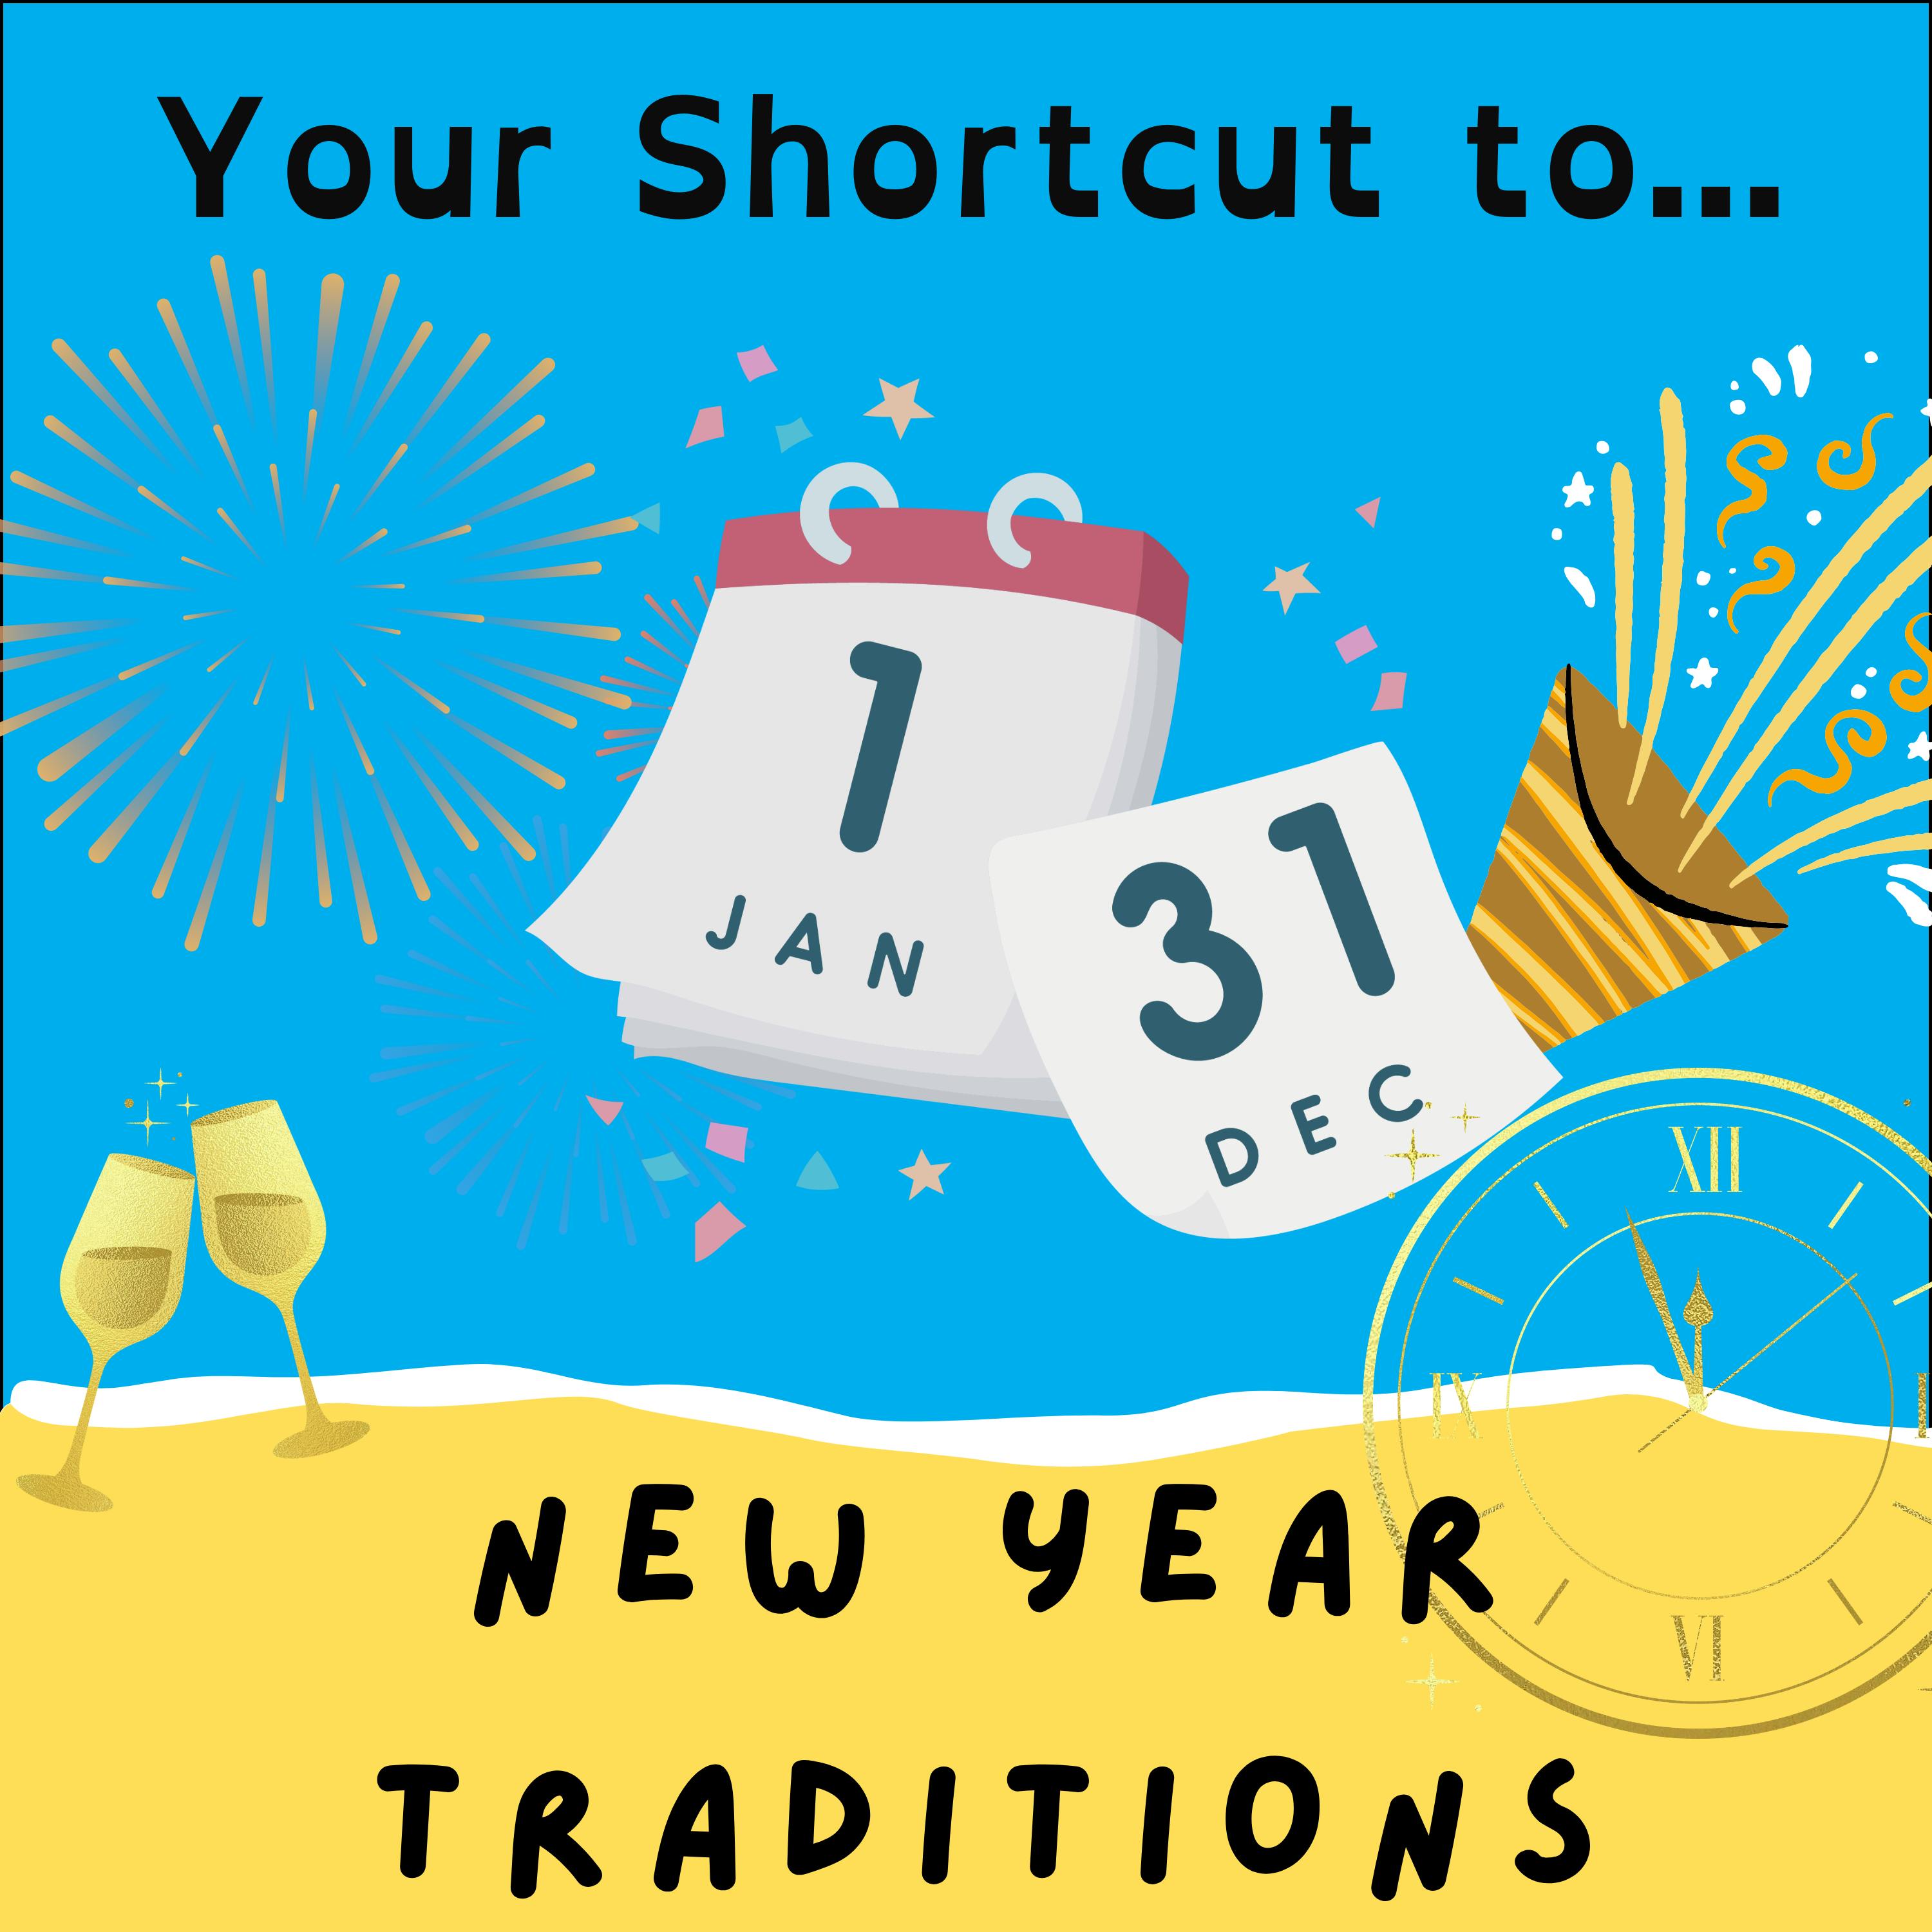 Your Shortcut to... New Year Traditions